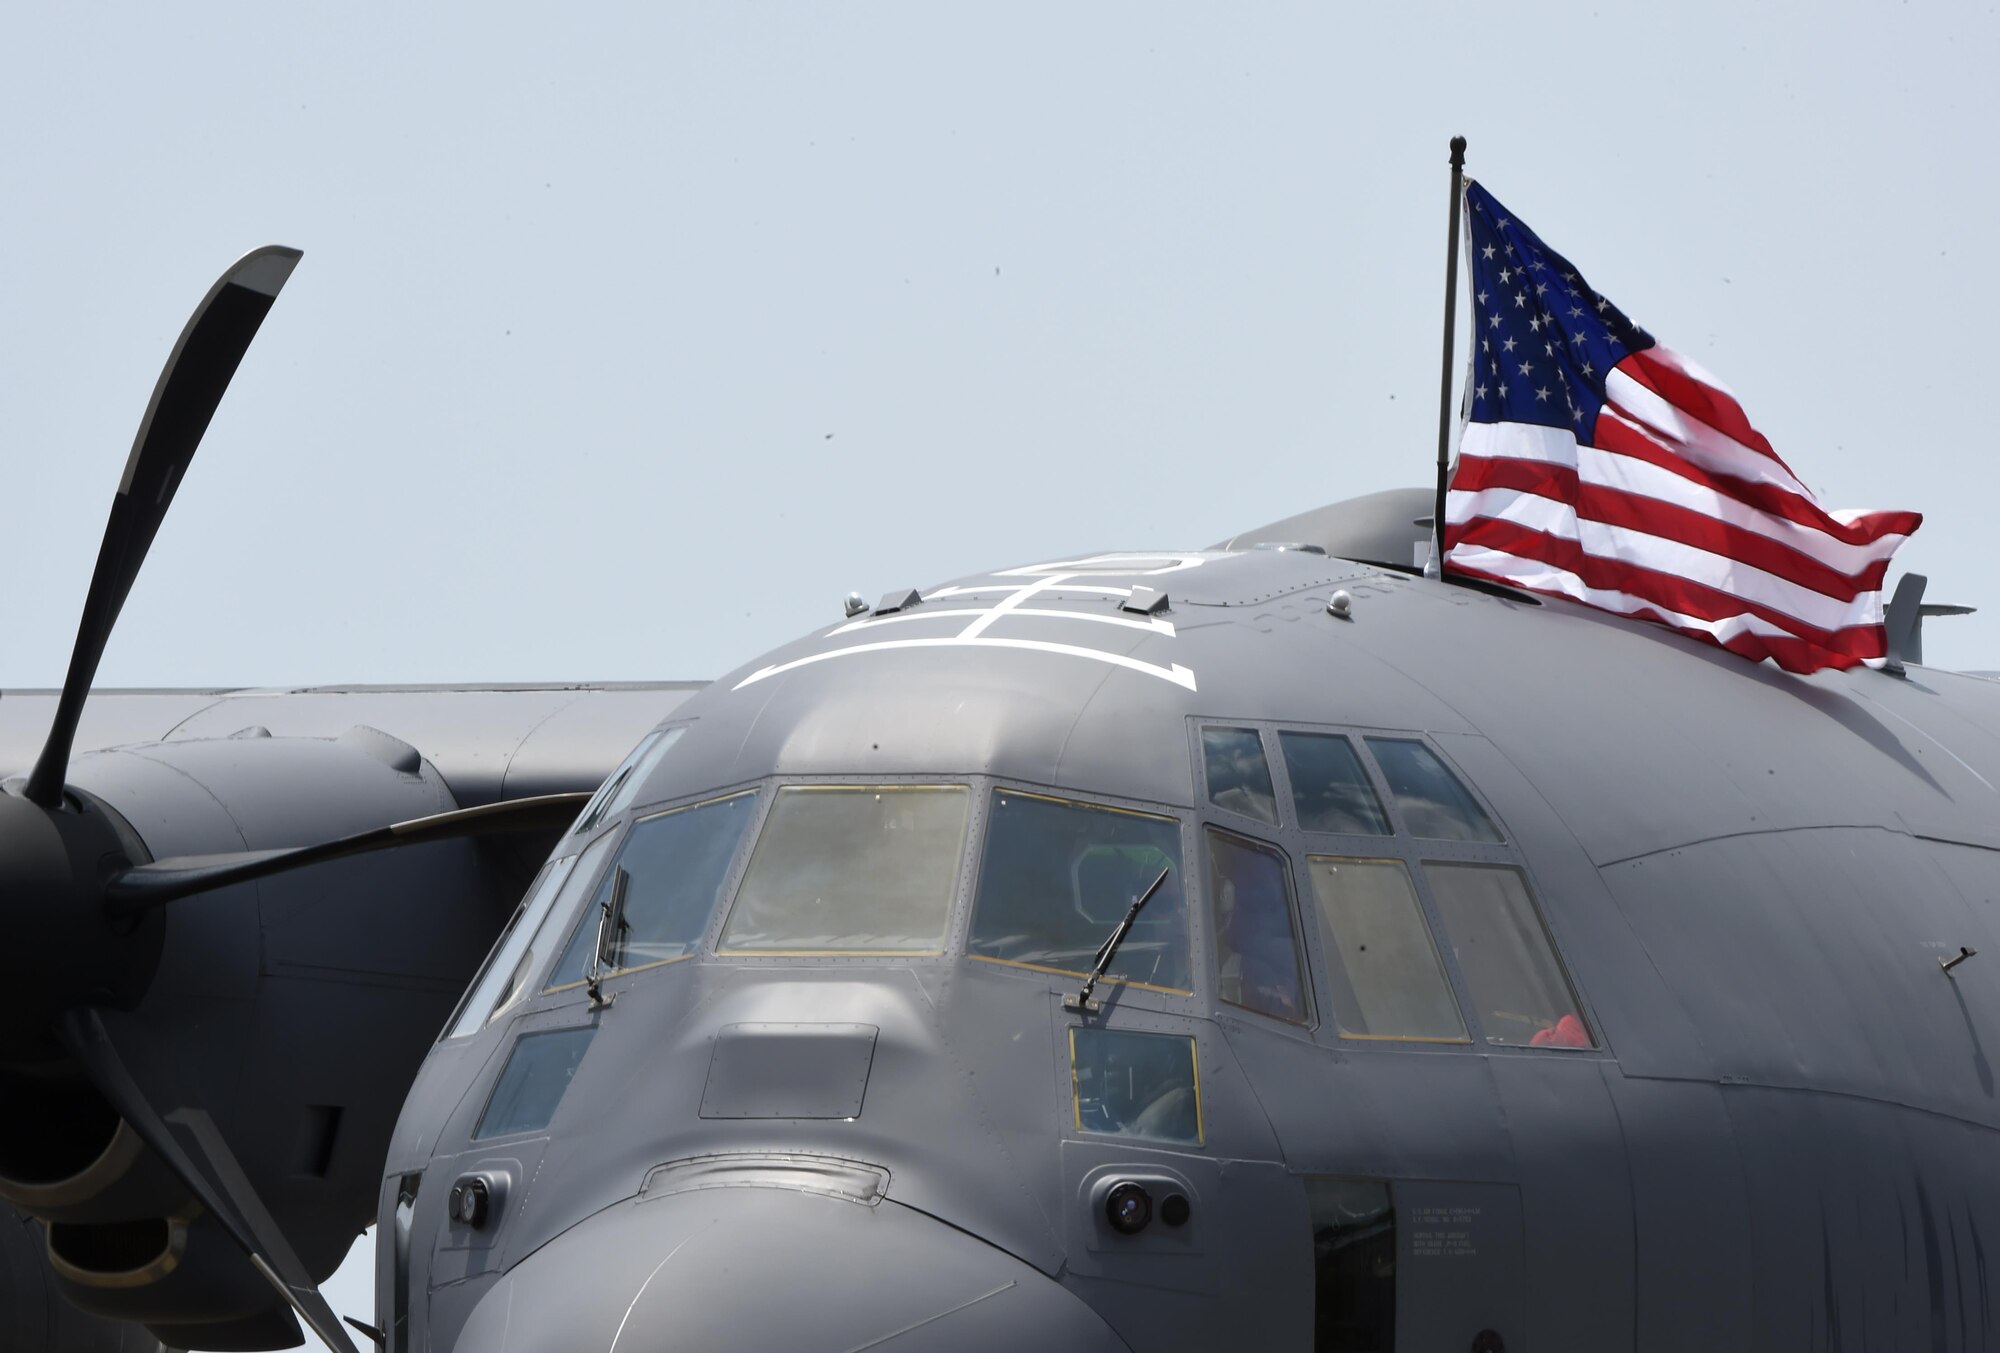 Air Force Special Operations Command receives its first AC-130J Ghostrider at Hurlburt Field, Fla., July 29, 2015. The AC-130J recently completed its initial developmental test and evaluation at Eglin Air Force Base, Fla., and will begin operational tests and evaluation by Airmen with the 1st Special Operations Group Detachment 2 and 1st Special Operations Aircraft Maintenance Squadron later this year. (U.S. Air Force photo by Airman Kai White/Released)